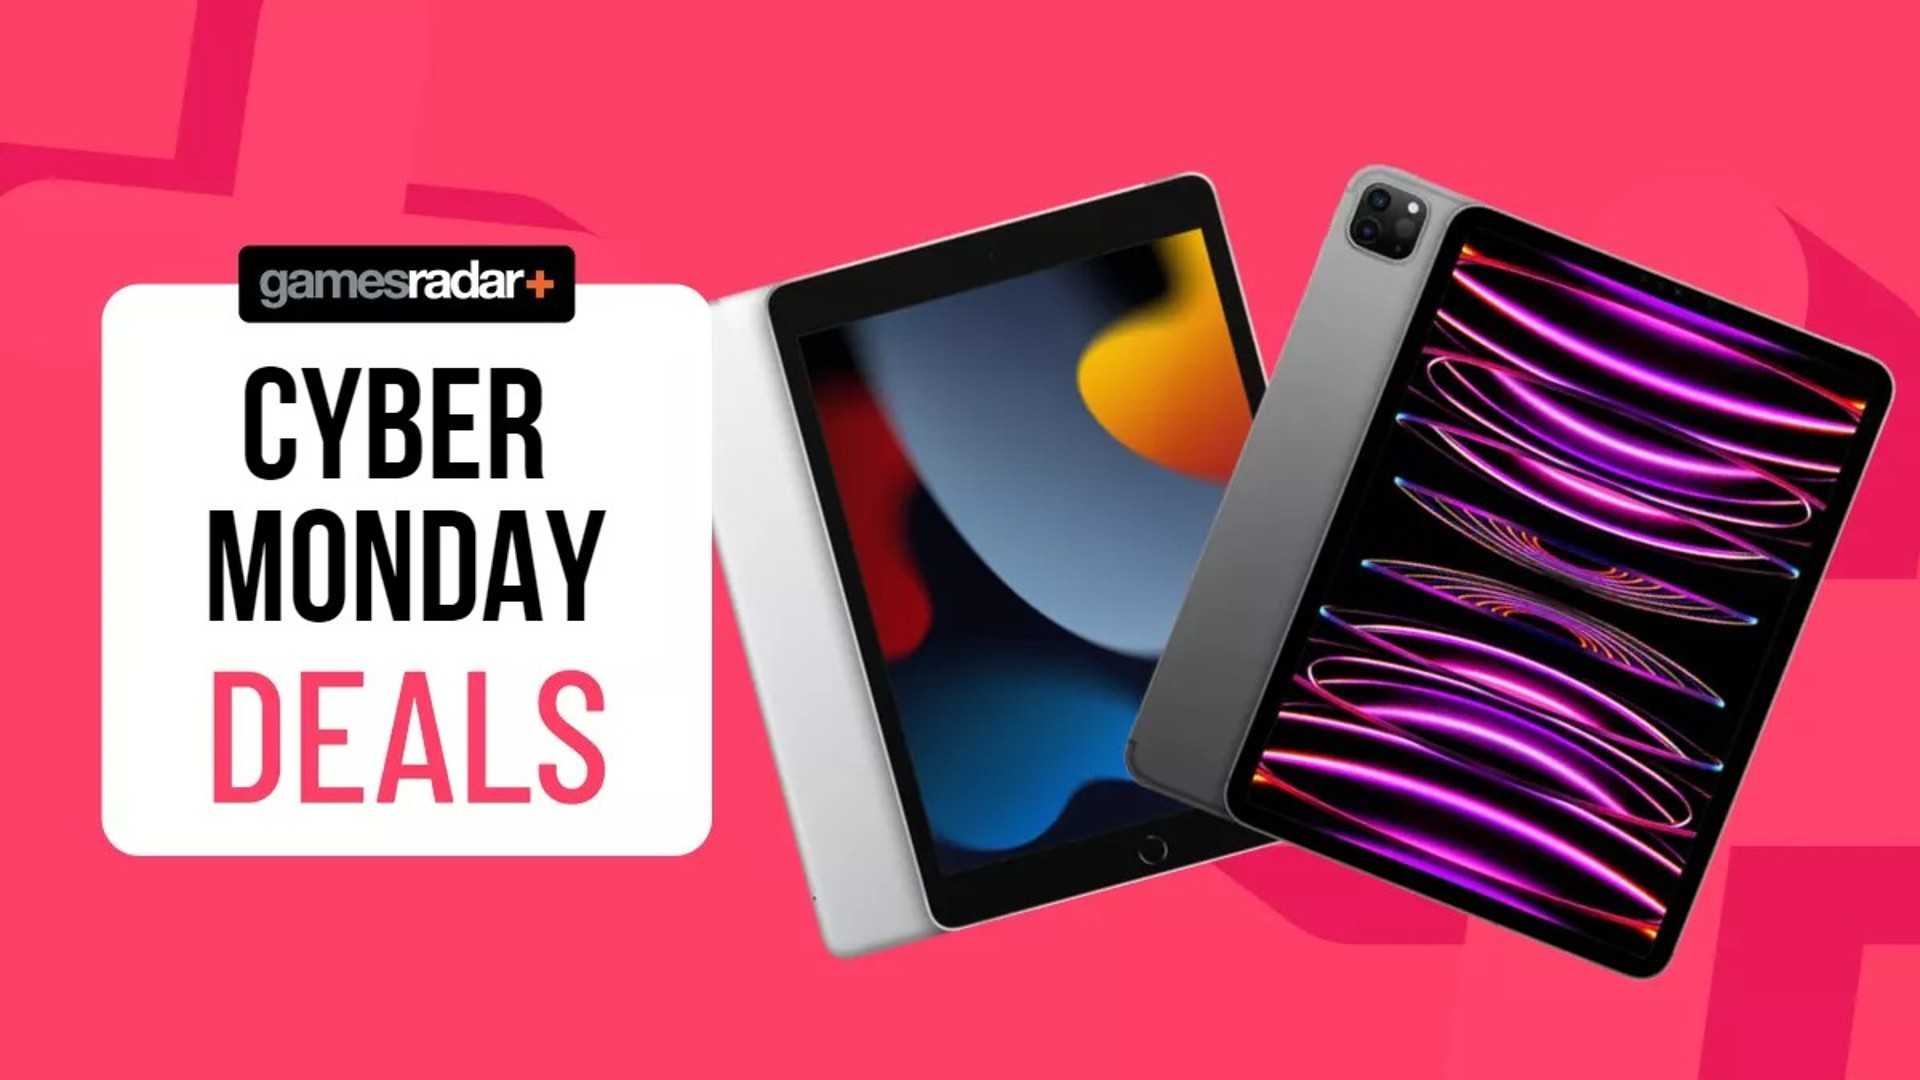 Cyber Monday iPad deals live: All the best discounts on Apple tablets